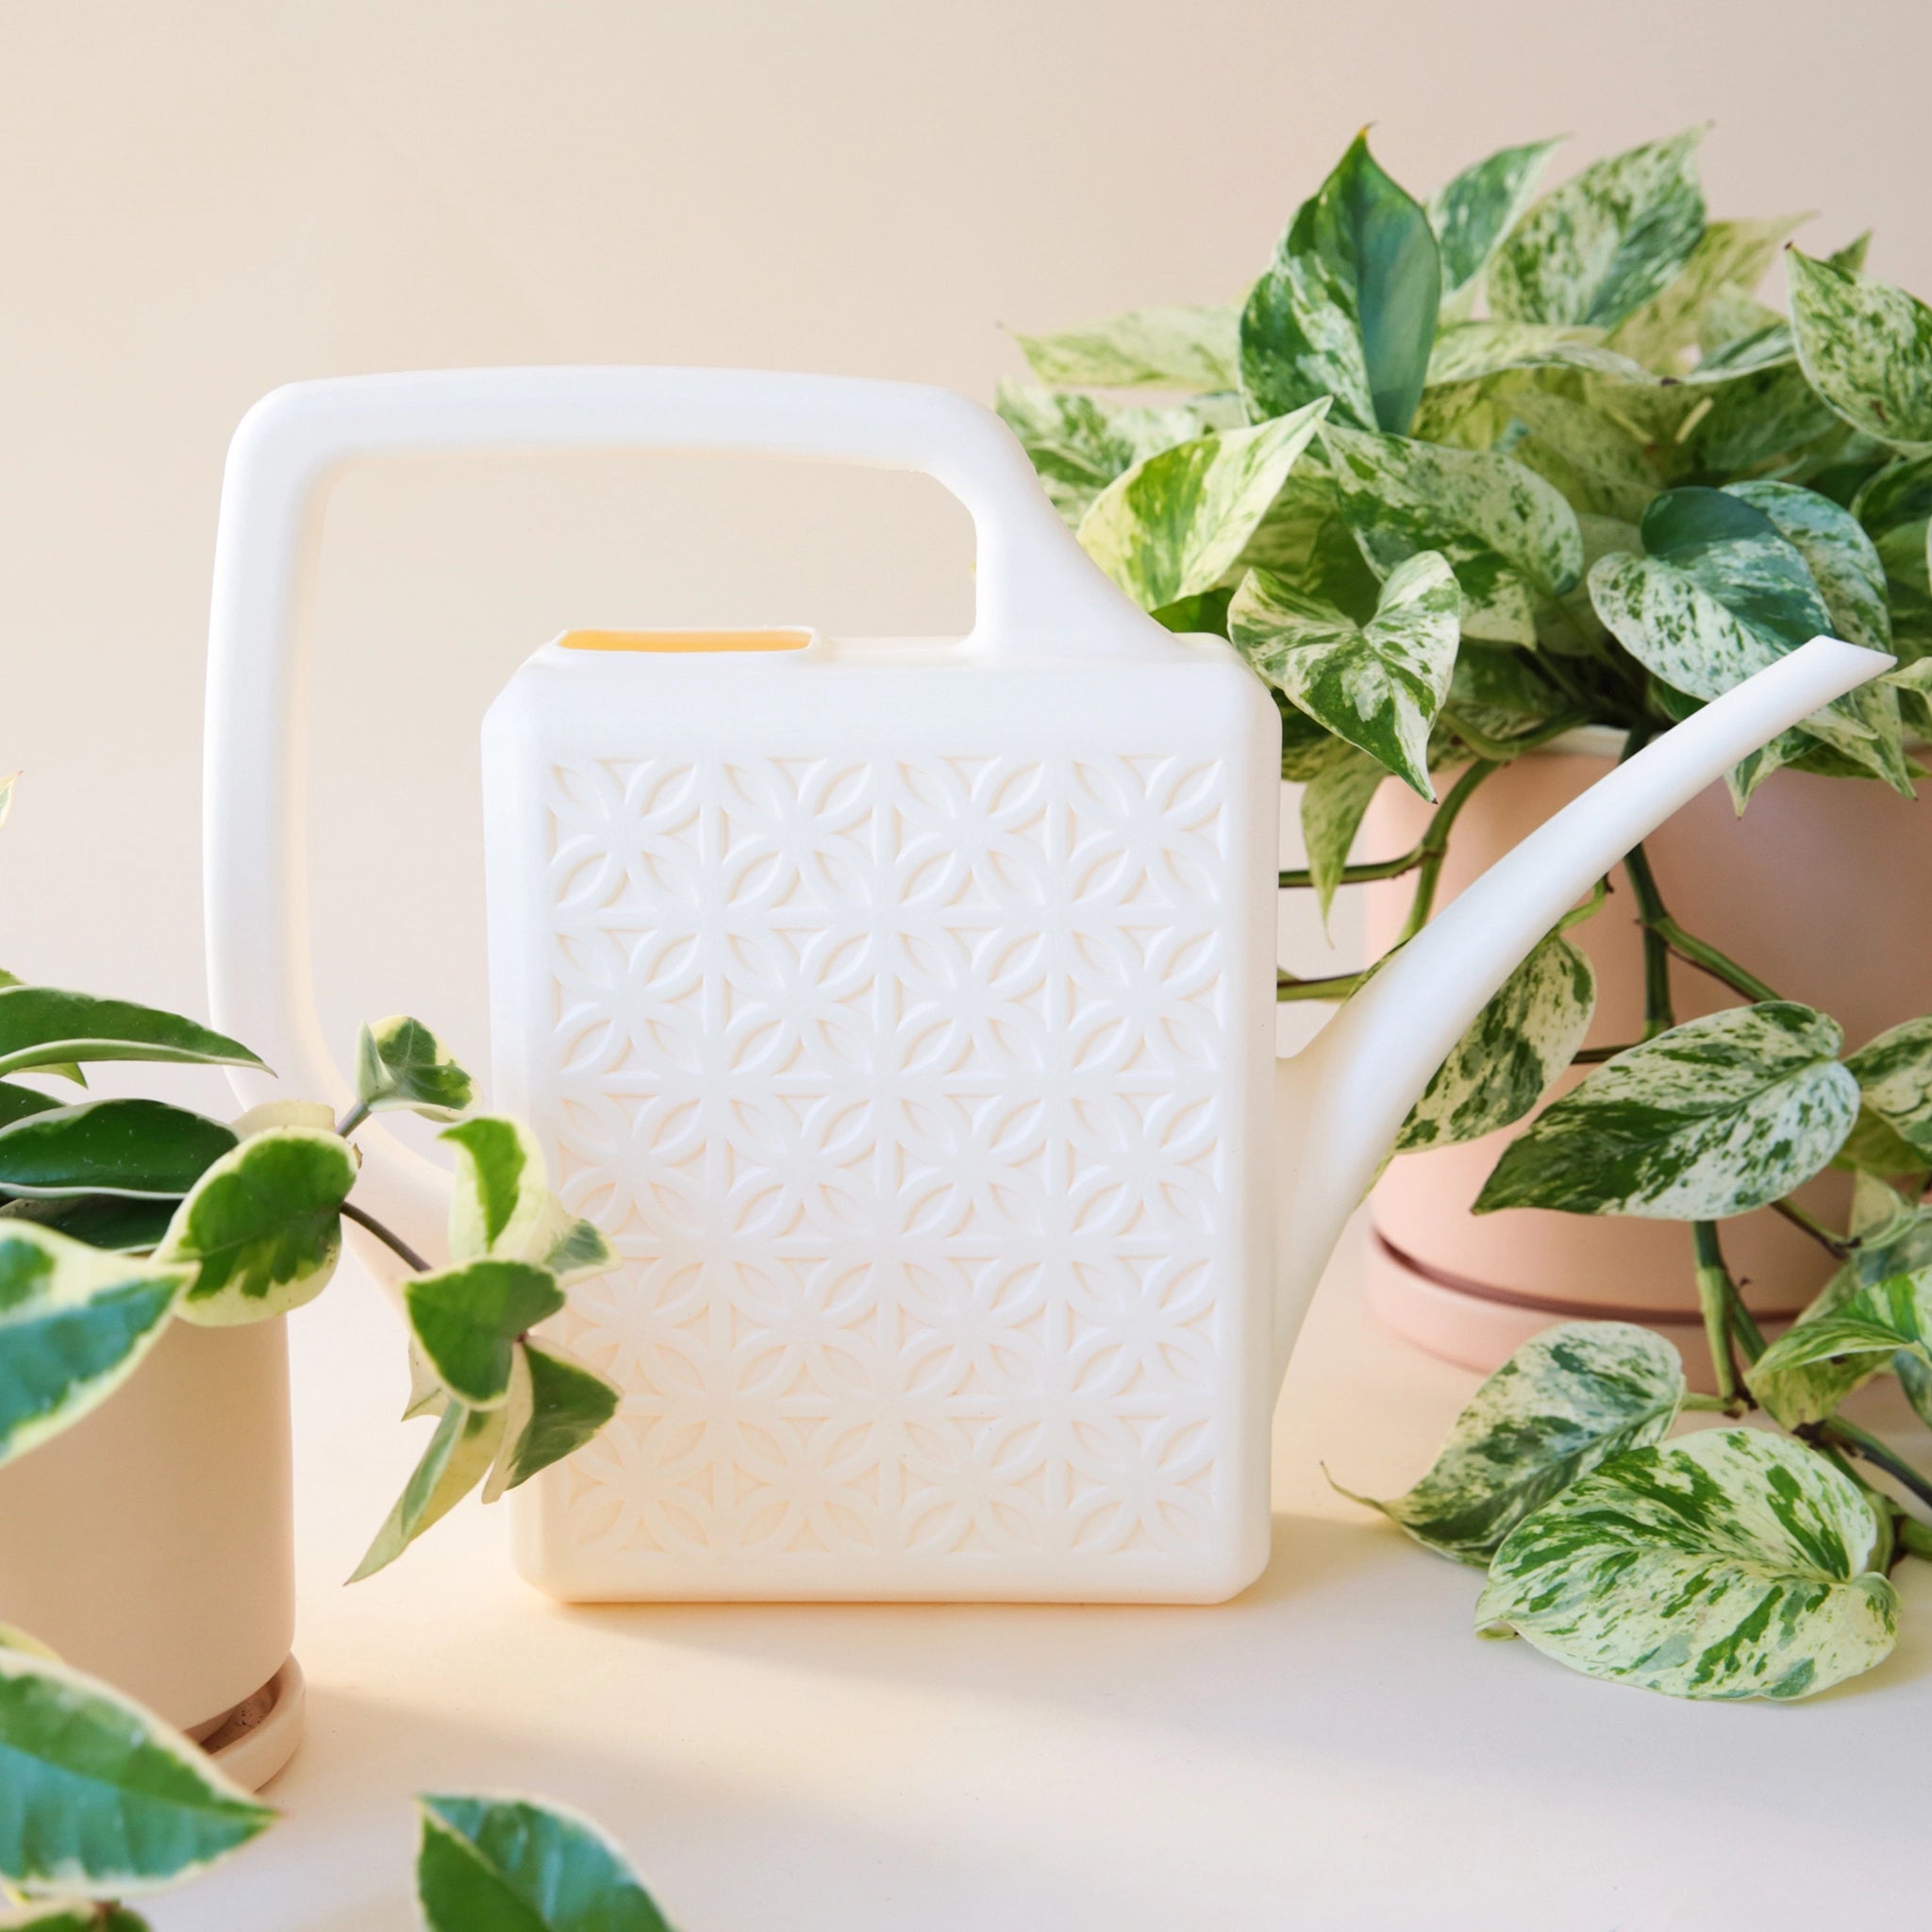 On a neutral background is a white plastic watering can with a long curved spout and a squared off handle along with a breeze block textured design on the sides of the watering can.